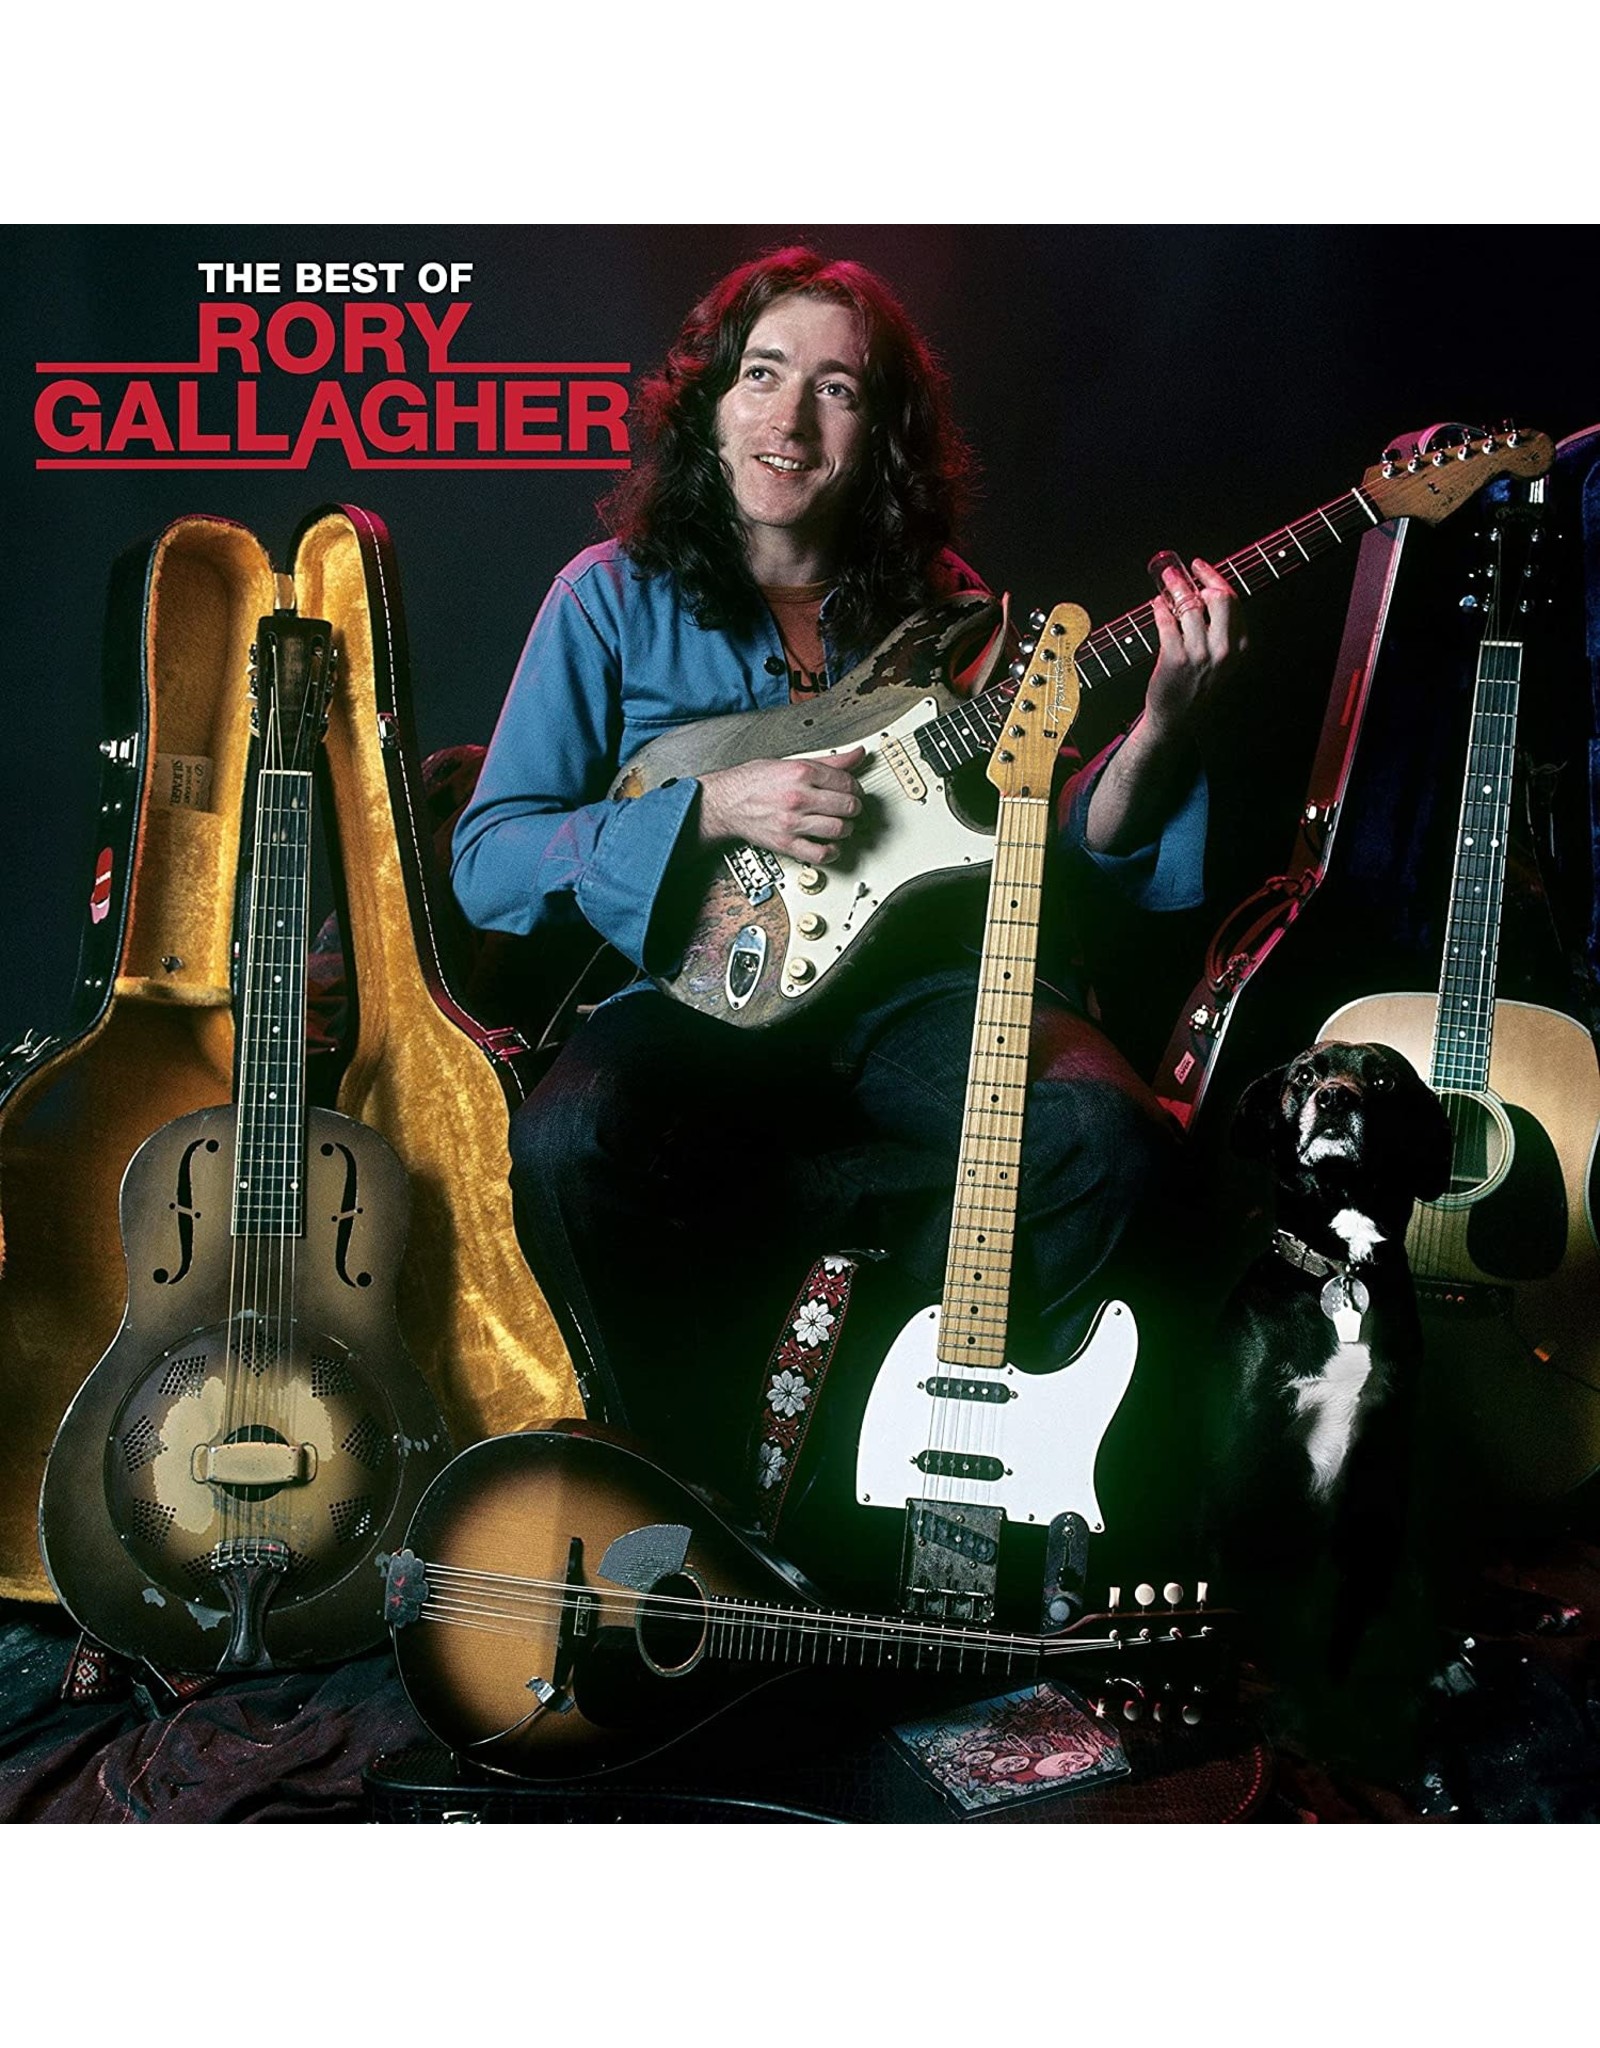 Rory Gallagher - The Best of Rory Gallagher